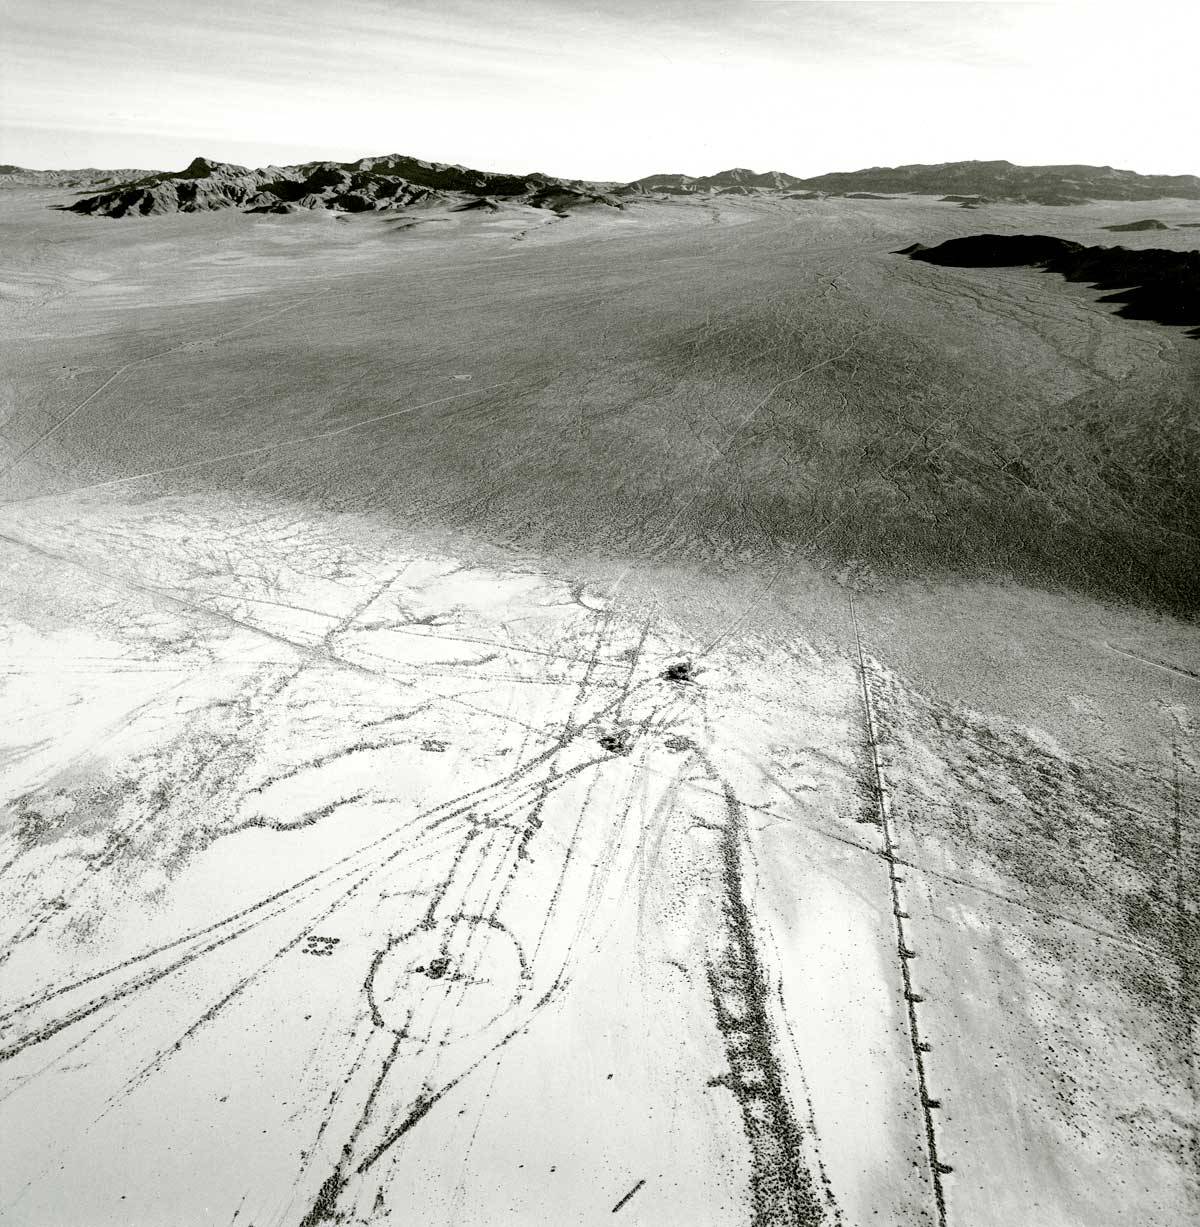 Emmet Gowin, THE EASTERN EDGE OF FRENCHMAN FLAT SHOWING THE TRANSITION FROM ALLUVIAL WASH TO DRY LAKE BED, LOOKING EAST, AREA 6, NEVADA TEST SITE, 1997. (From THE NEVADA TEST SITE by Emmet Gowin, with a foreword by Robert Adams, Princeton University Press, 2019.)